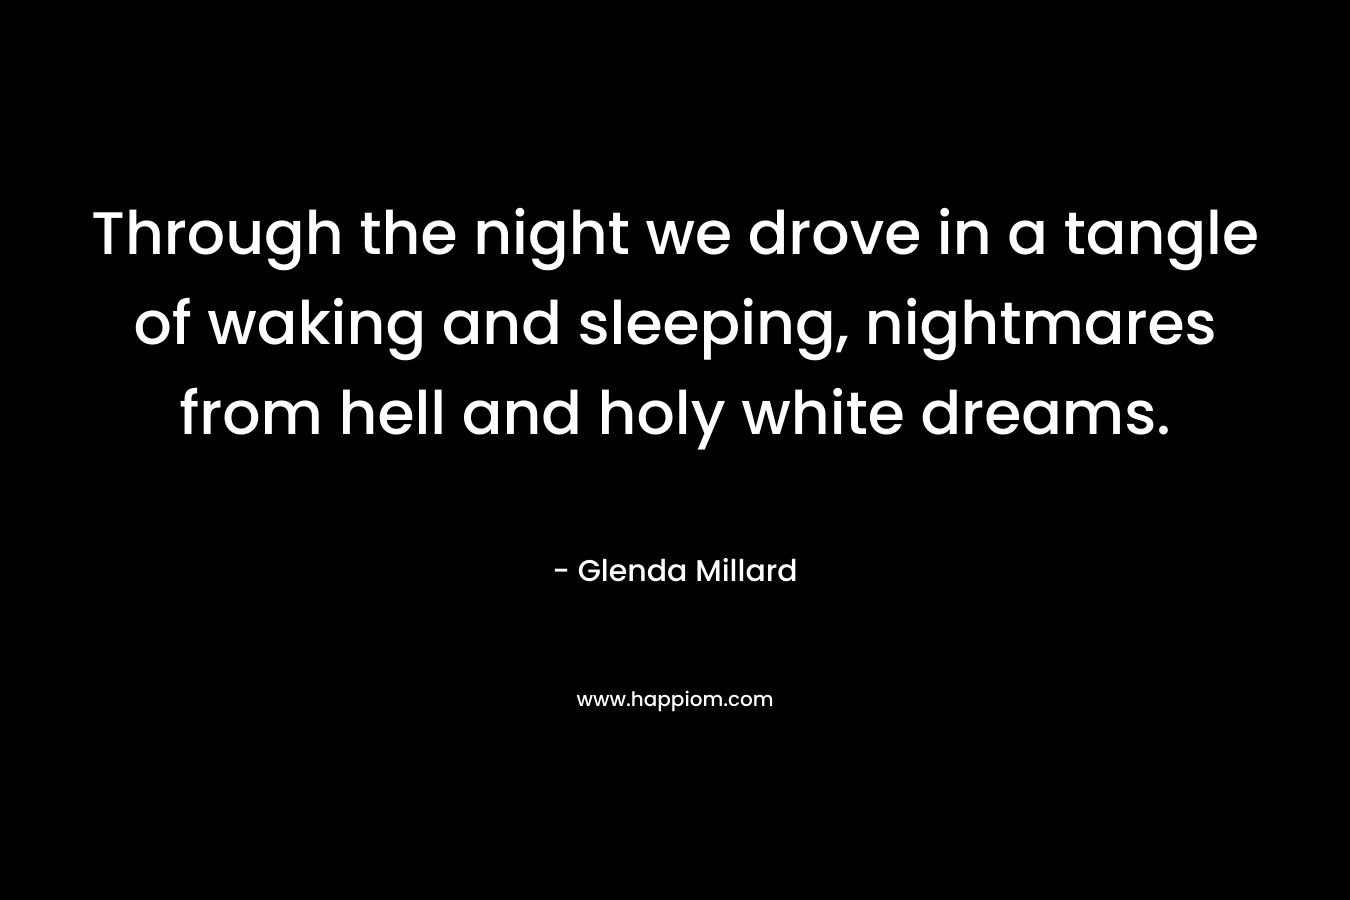 Through the night we drove in a tangle of waking and sleeping, nightmares from hell and holy white dreams. – Glenda Millard